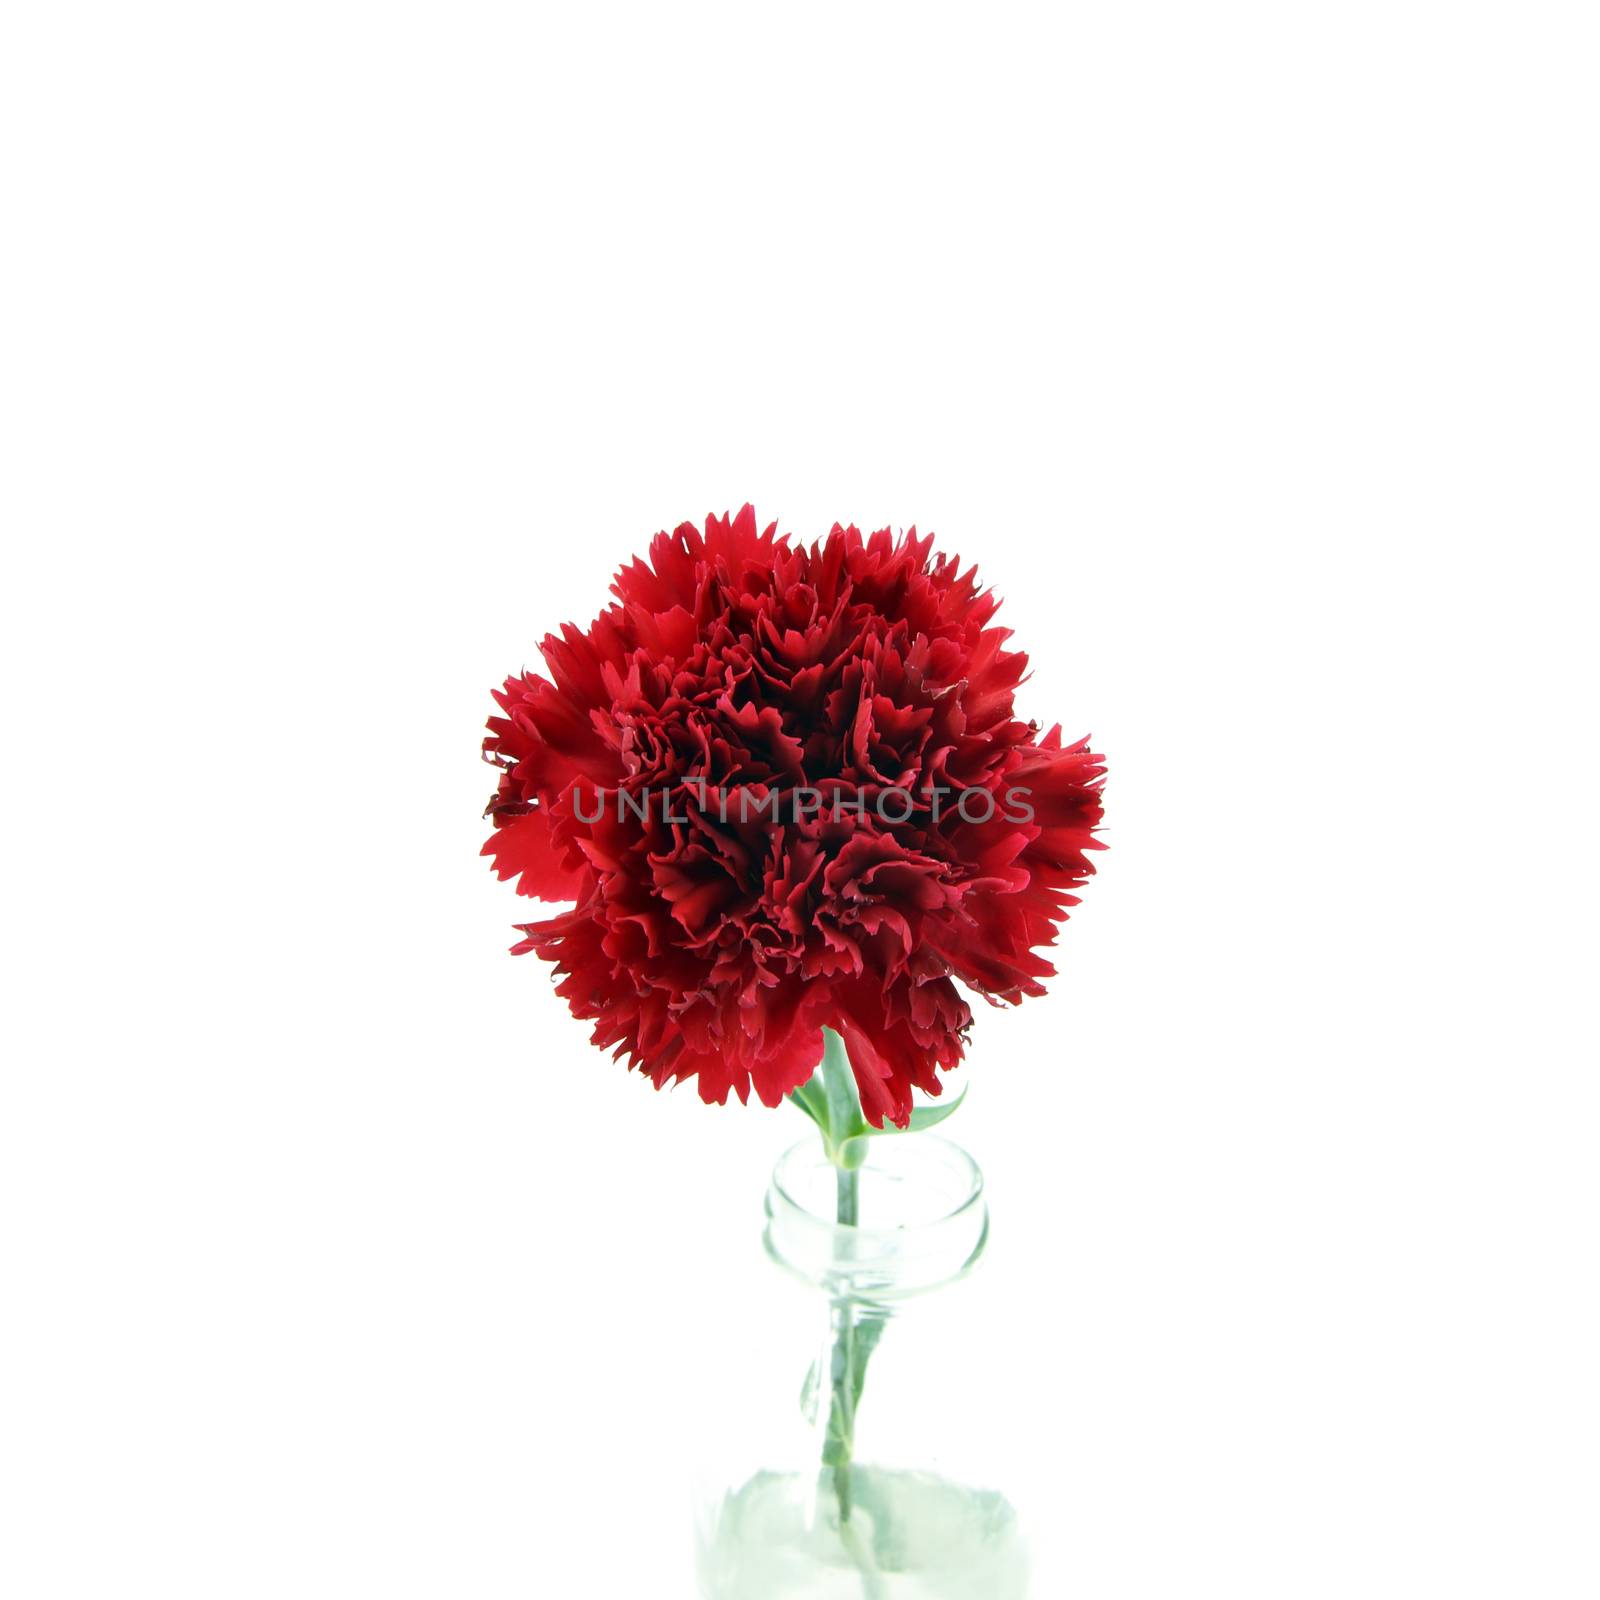 Smaller carnations on a white background  for mother's day.